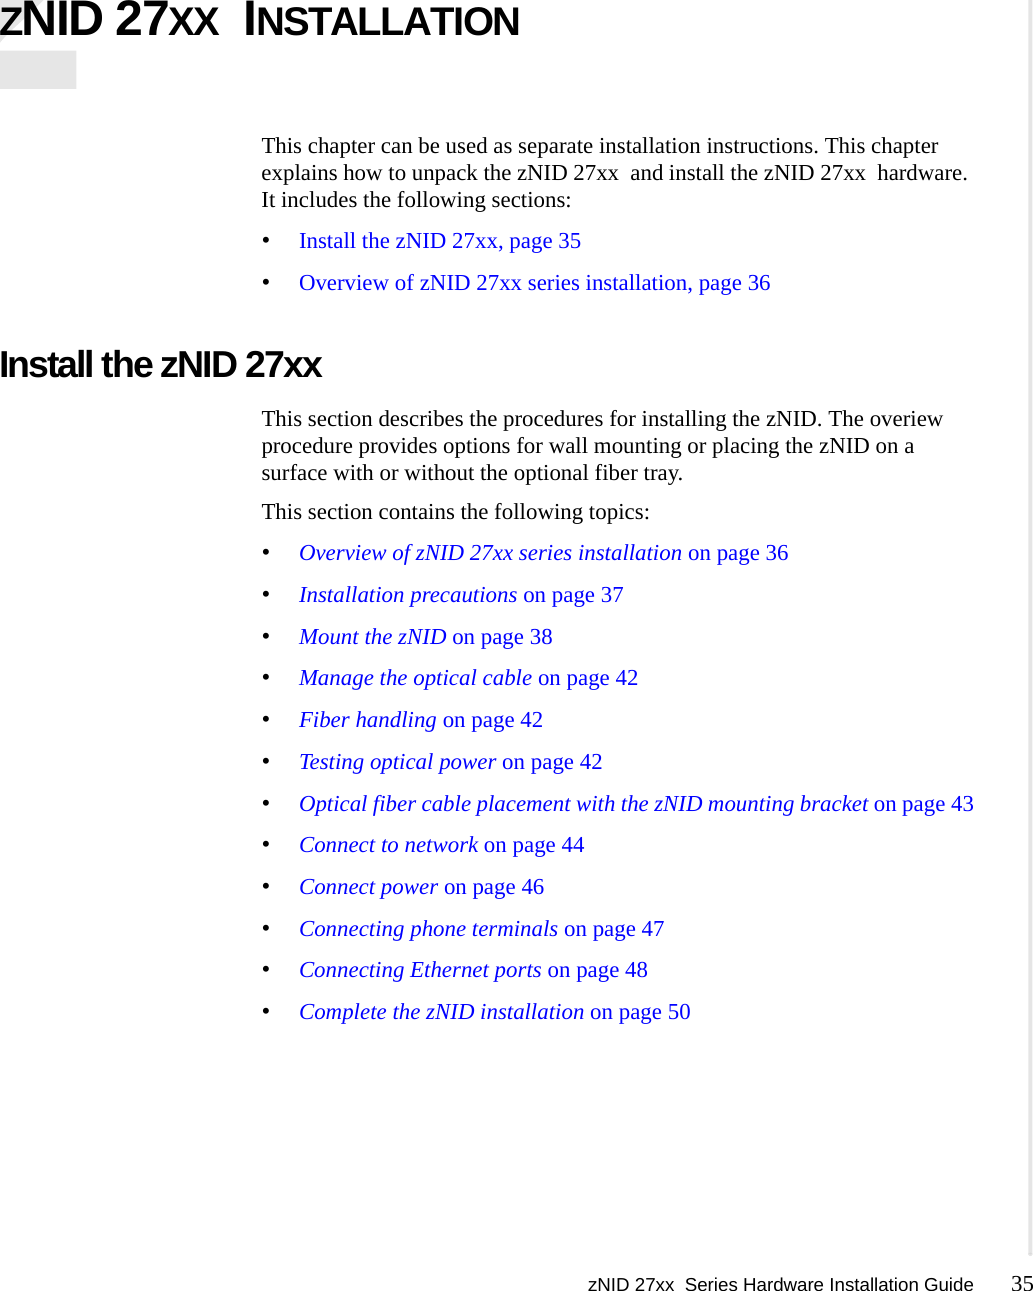 zNID 27xx  Series Hardware Installation Guide 35  ZNID 27XX  INSTALLATIONThis chapter can be used as separate installation instructions. This chapter explains how to unpack the zNID 27xx  and install the zNID 27xx  hardware. It includes the following sections:•Install the zNID 27xx, page 35•Overview of zNID 27xx series installation, page 36Install the zNID 27xx This section describes the procedures for installing the zNID. The overiew procedure provides options for wall mounting or placing the zNID on a surface with or without the optional fiber tray.This section contains the following topics:•Overview of zNID 27xx series installation on page 36•Installation precautions on page 37•Mount the zNID on page 38•Manage the optical cable on page 42•Fiber handling on page 42•Testing optical power on page 42•Optical fiber cable placement with the zNID mounting bracket on page 43•Connect to network on page 44•Connect power on page 46•Connecting phone terminals on page 47•Connecting Ethernet ports on page 48•Complete the zNID installation on page 50